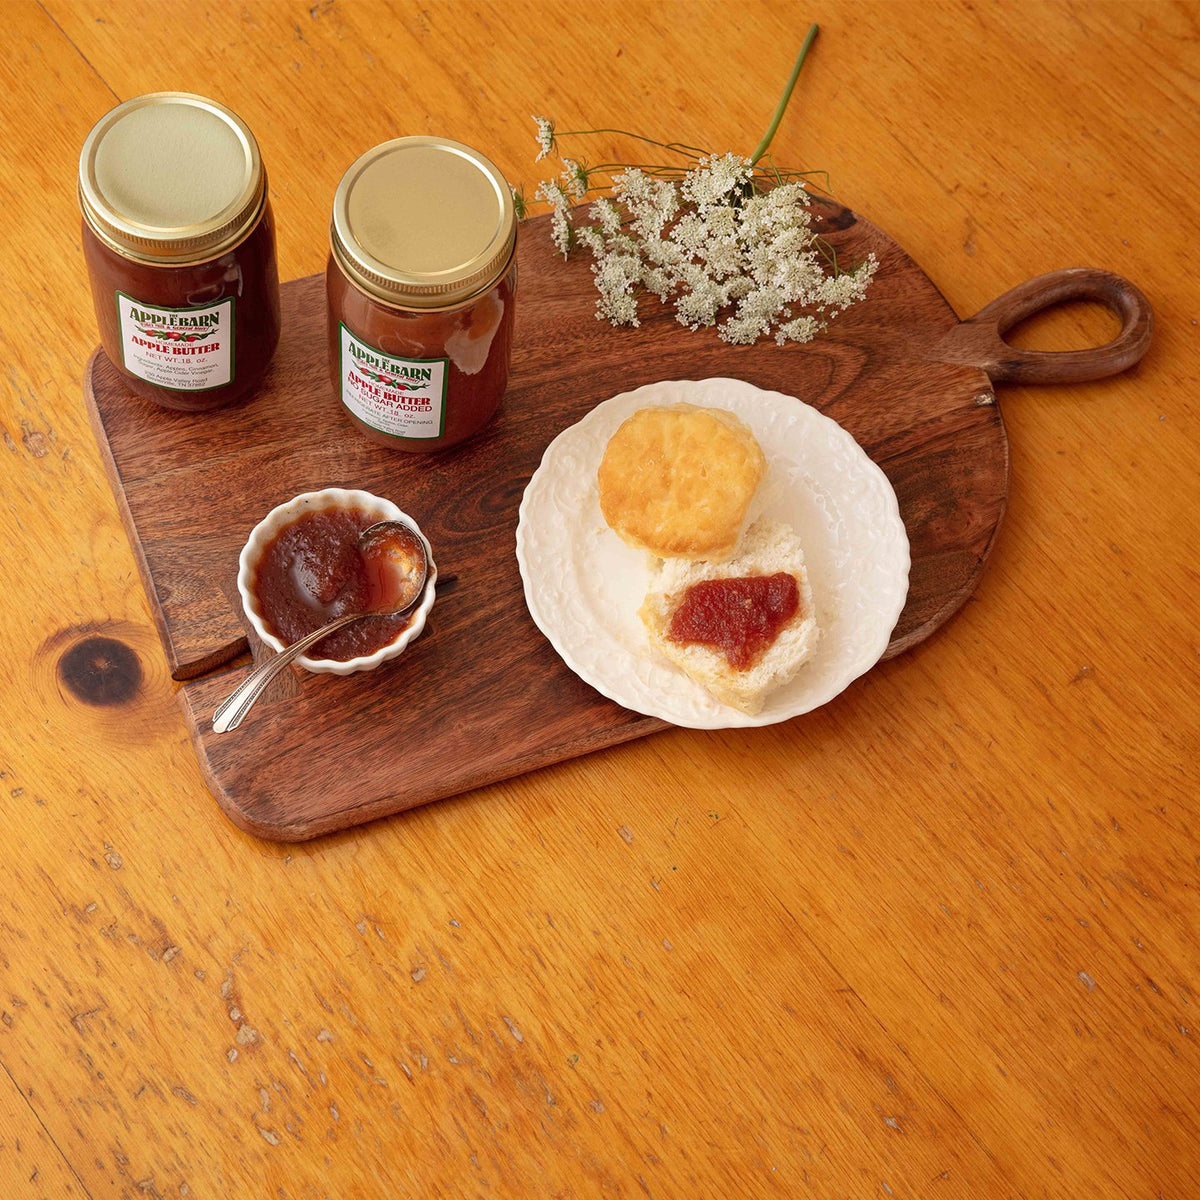 Apple butter on a biscuit